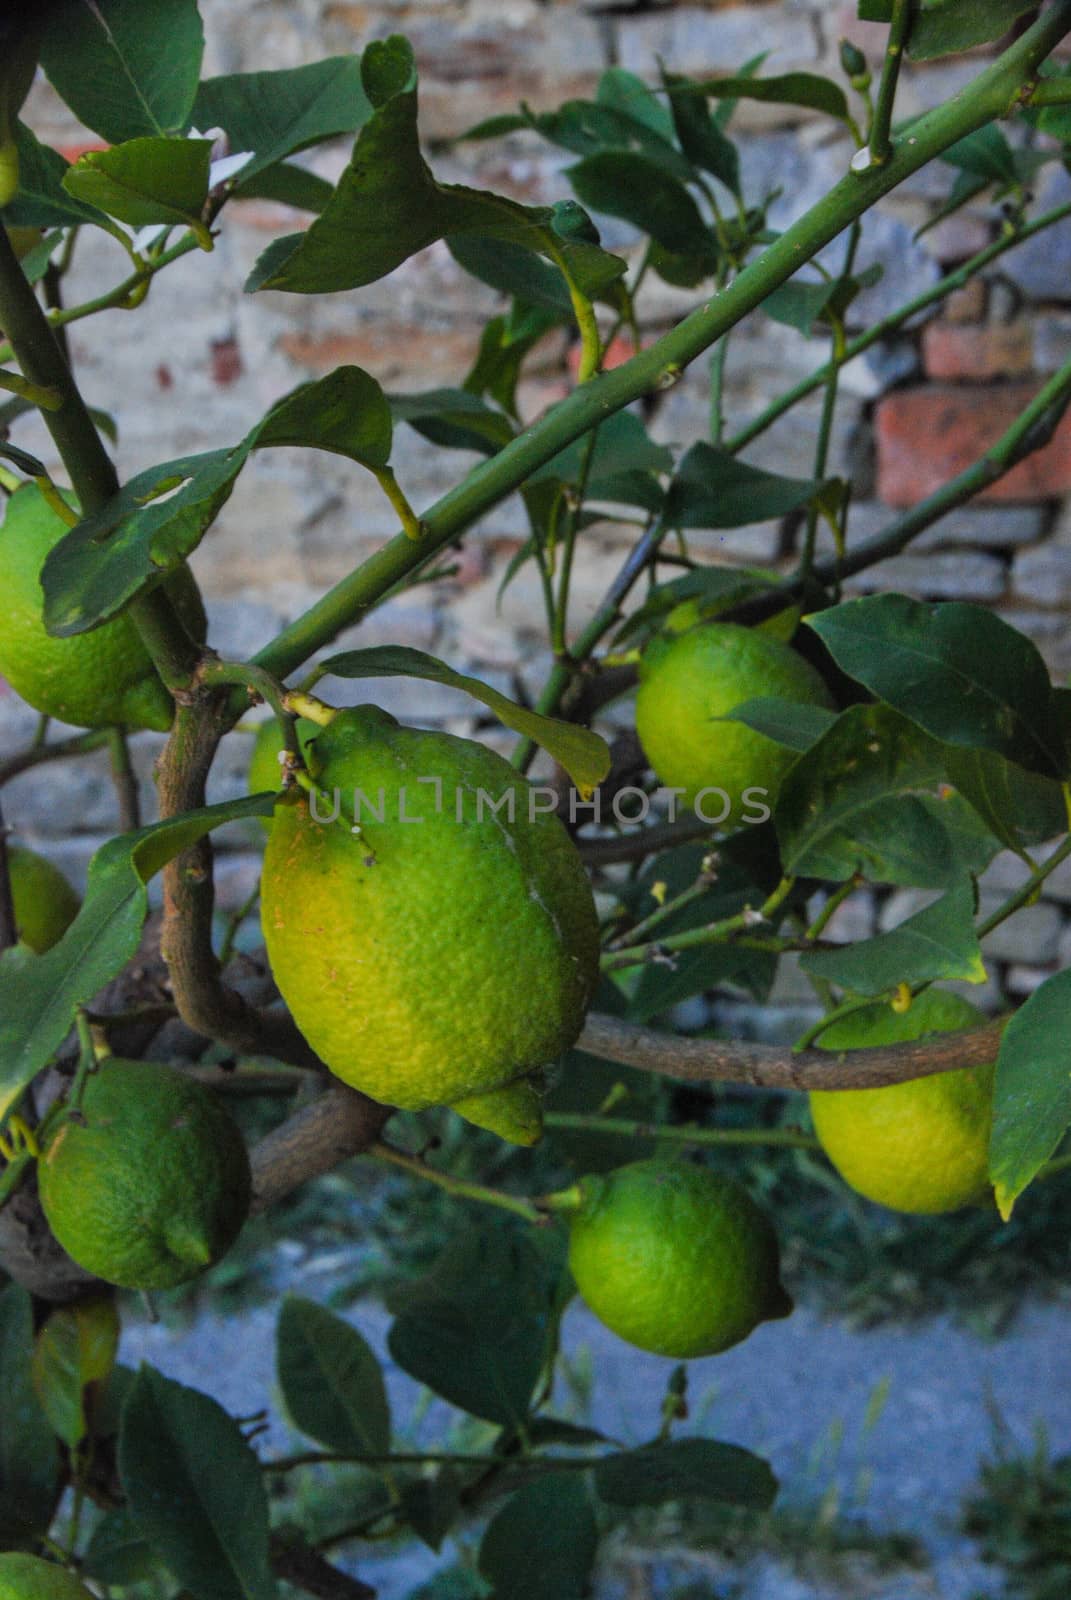 Lemons from the plant by cosca